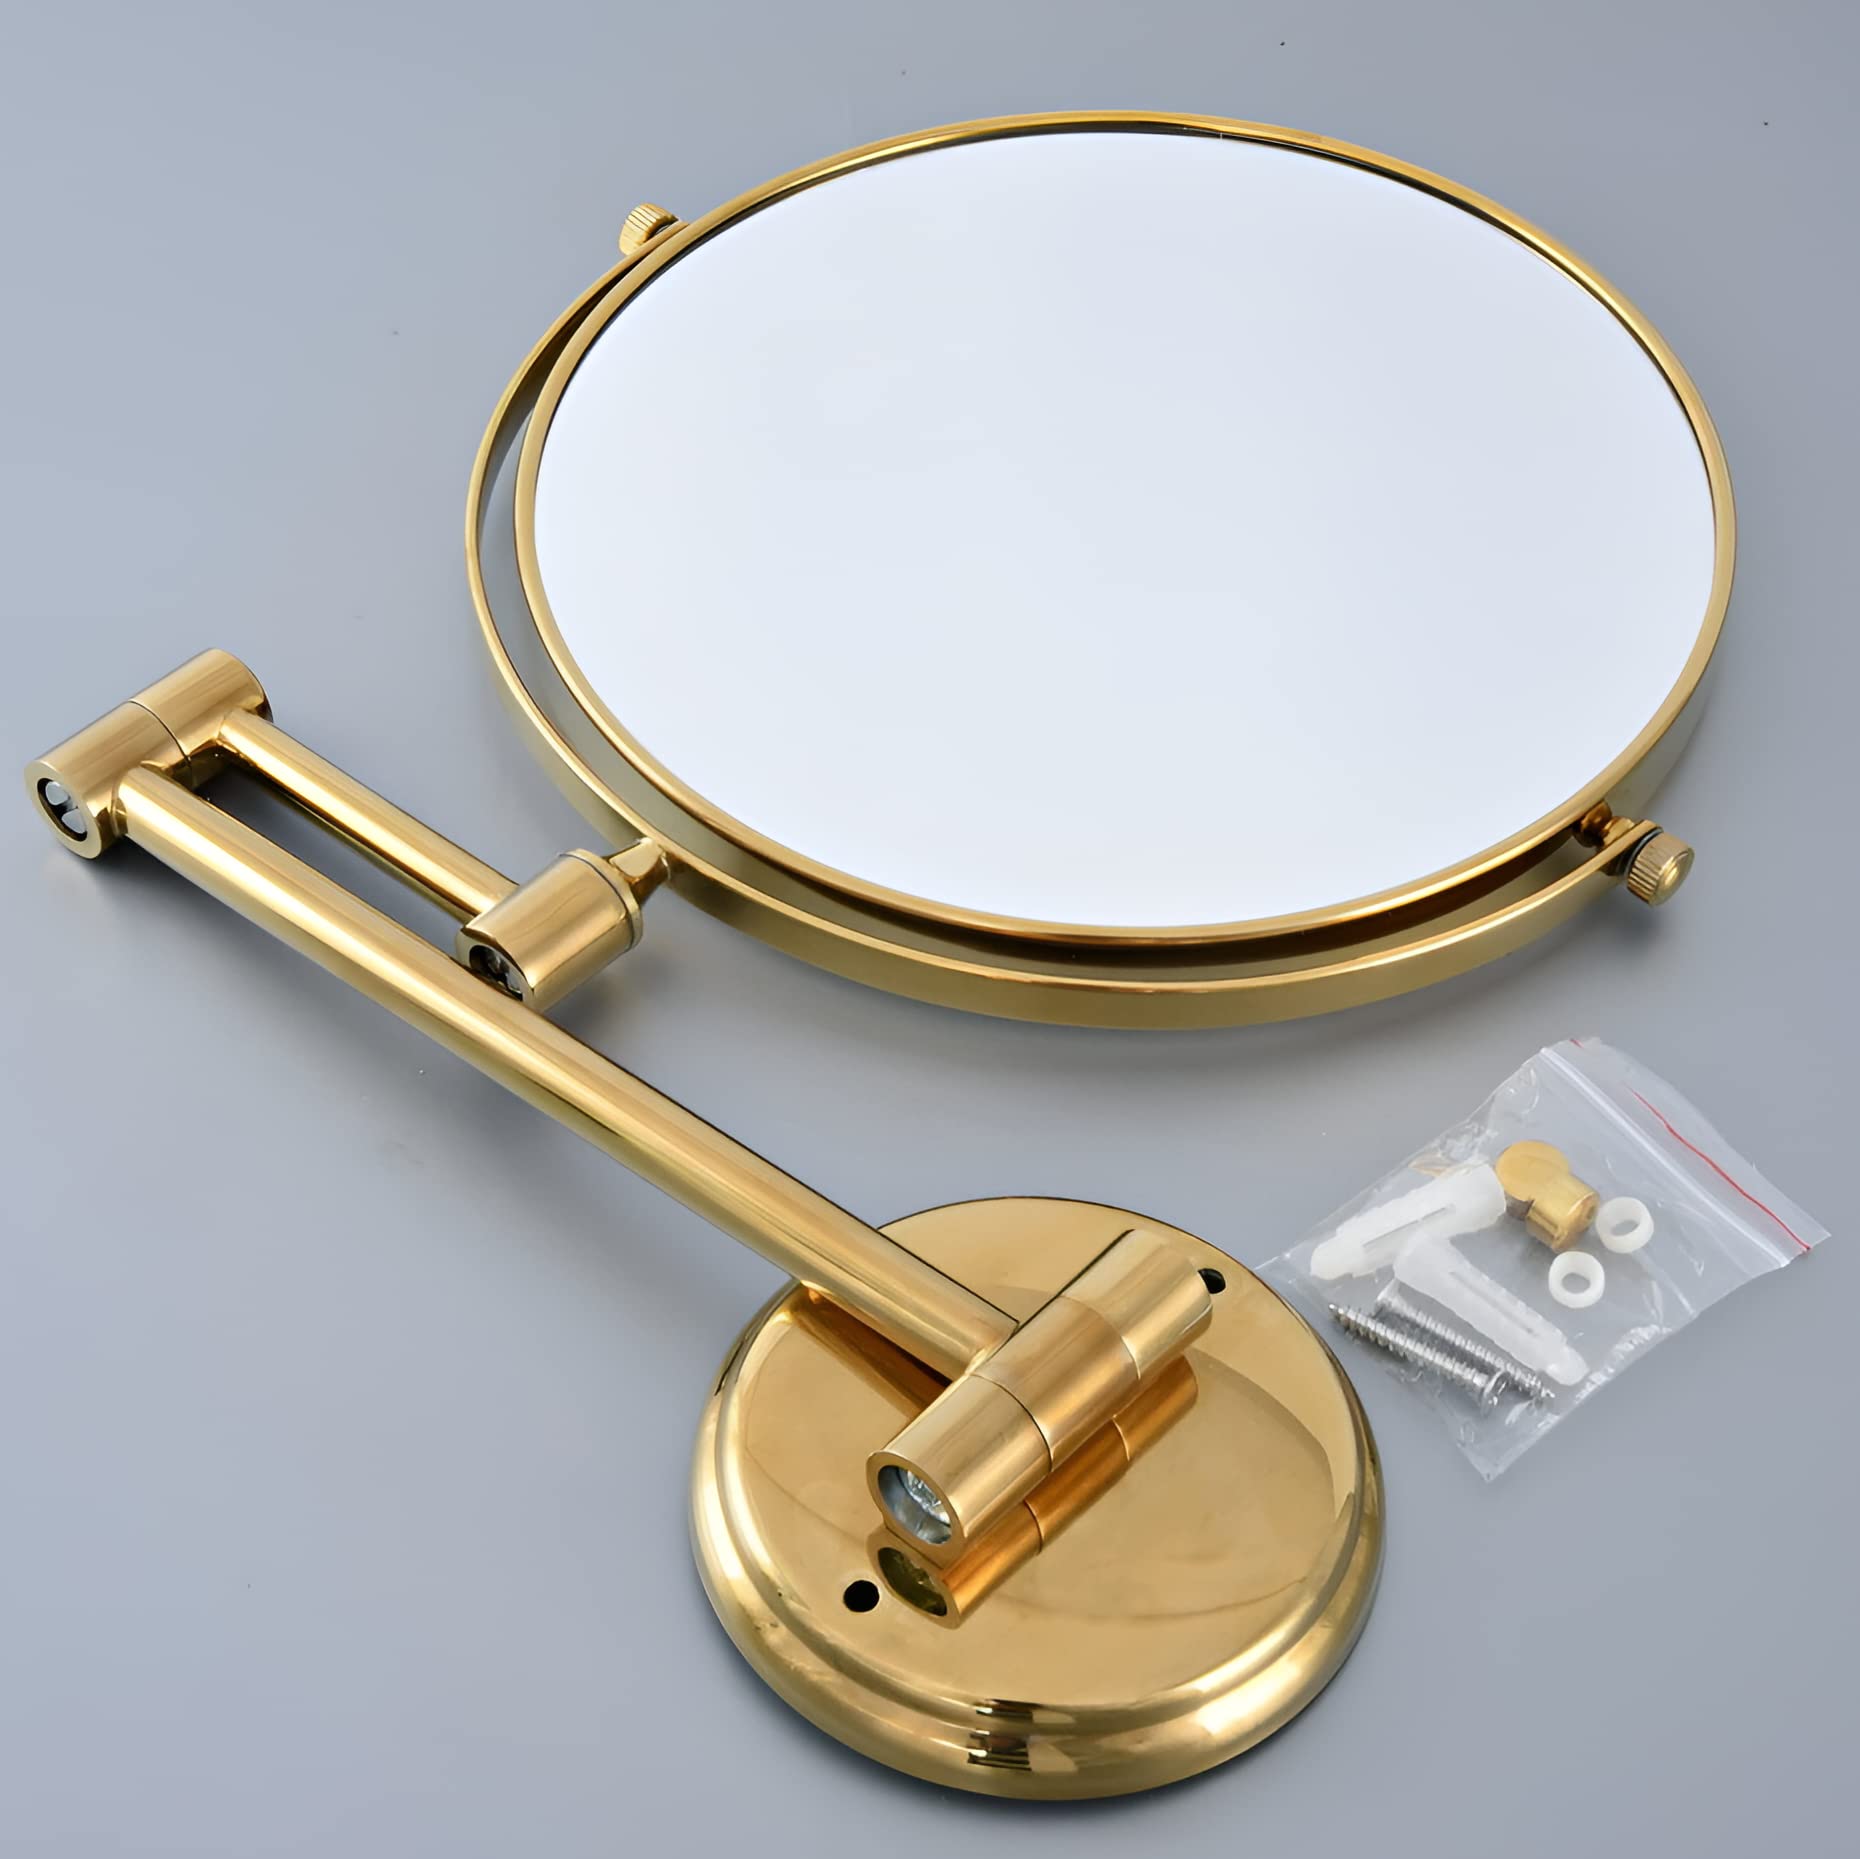 Plantex Brass and 304 Grade Stainless Steel Body Two-Sided 360° Swivel Mirror/Makeup Mirror/Vanity Mirror Wall Mounted with 10X Magnification,Golden Finish (8 inches-10x)